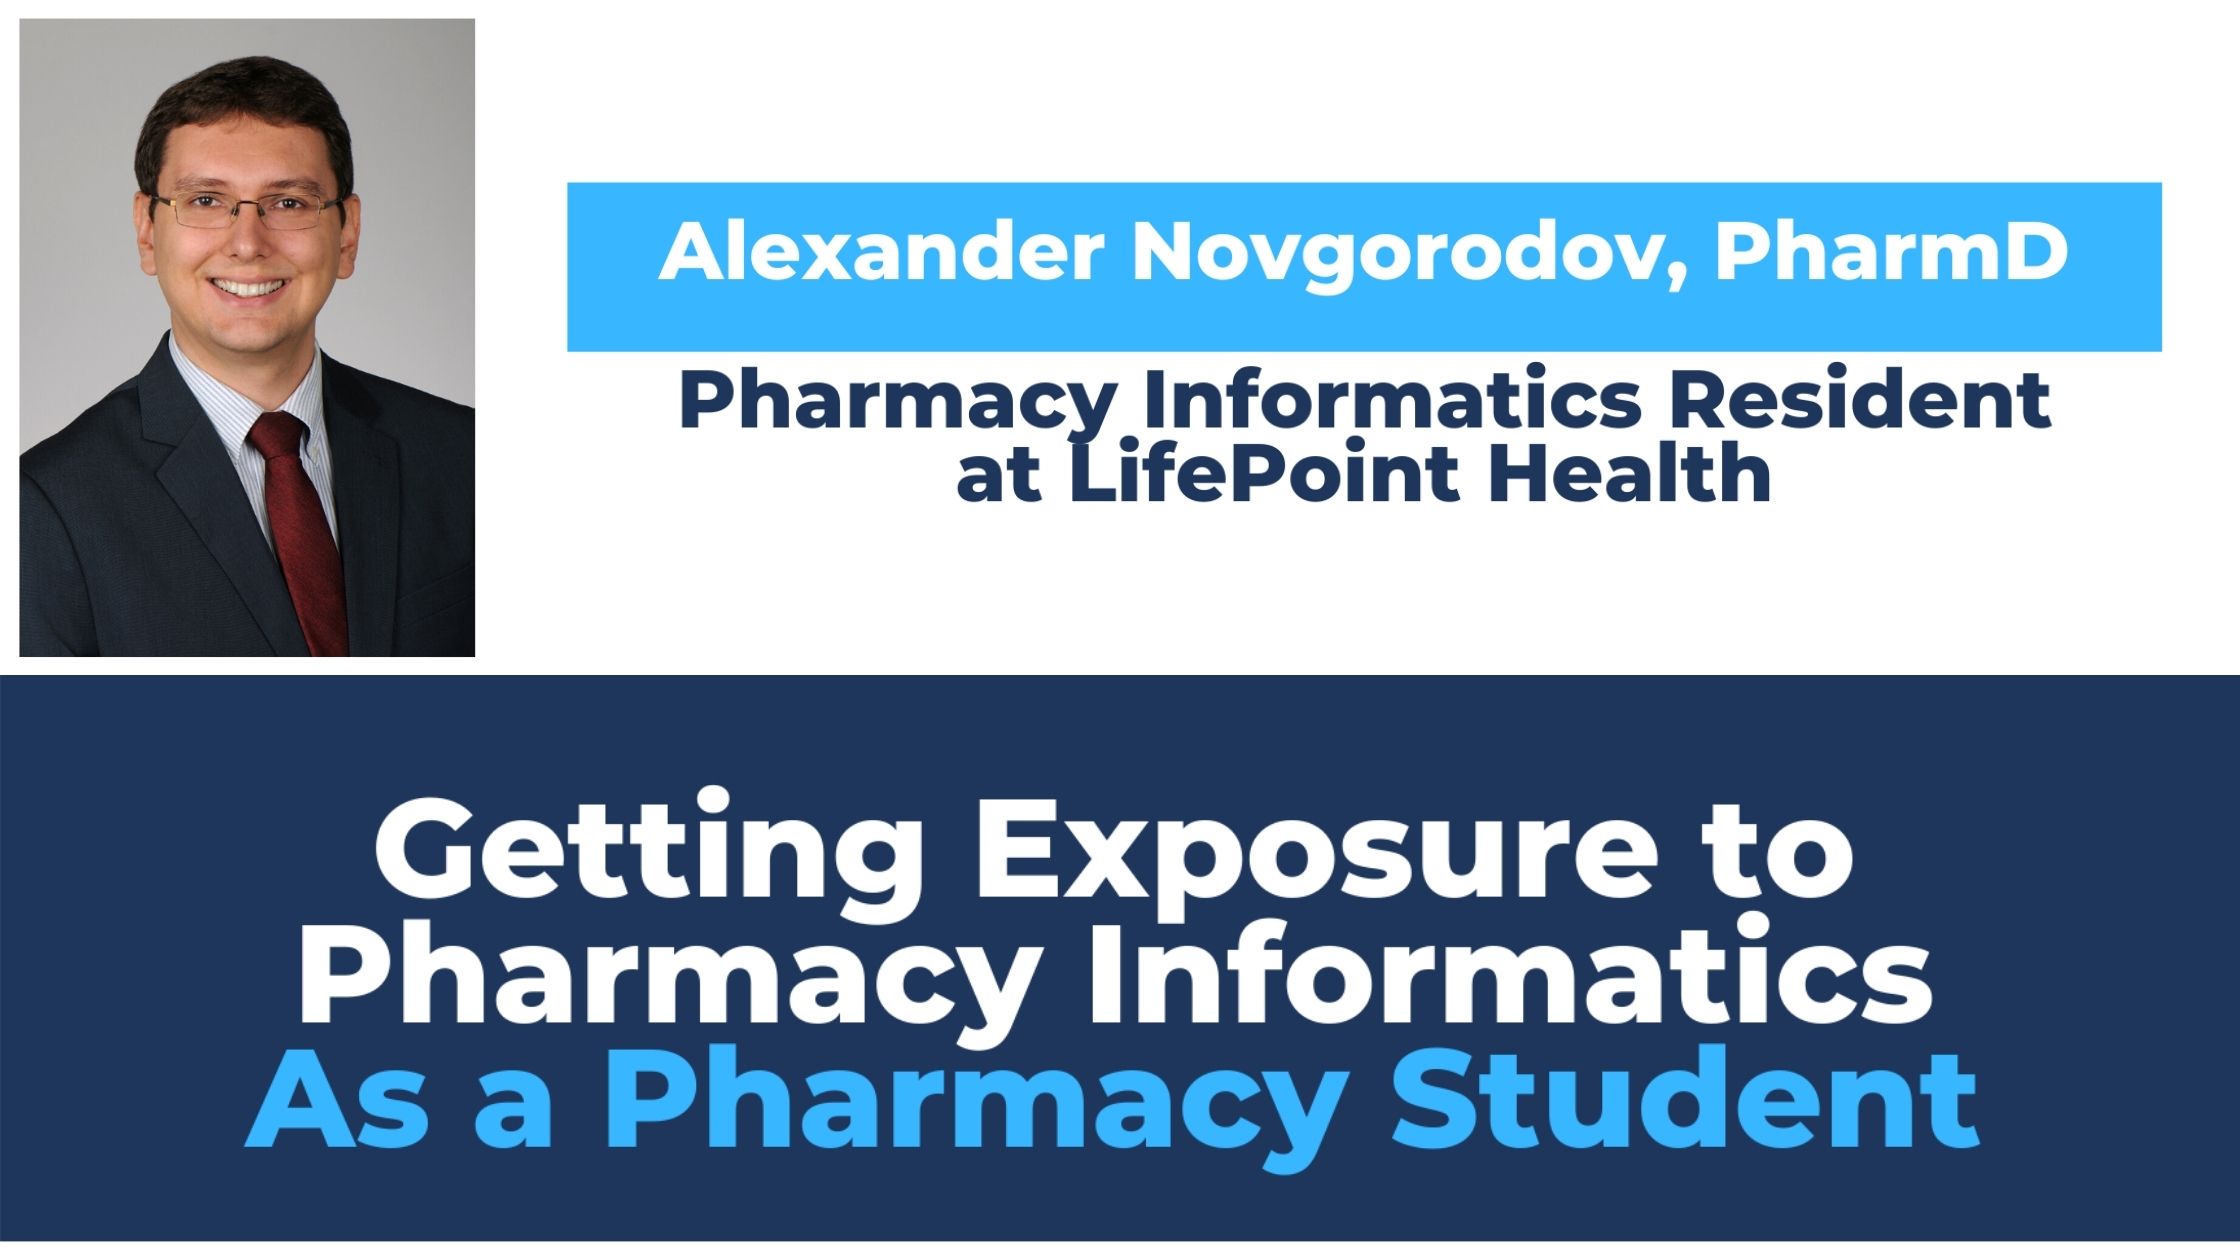 Getting Exposure to Pharmacy Informatics as a Pharmacy Student